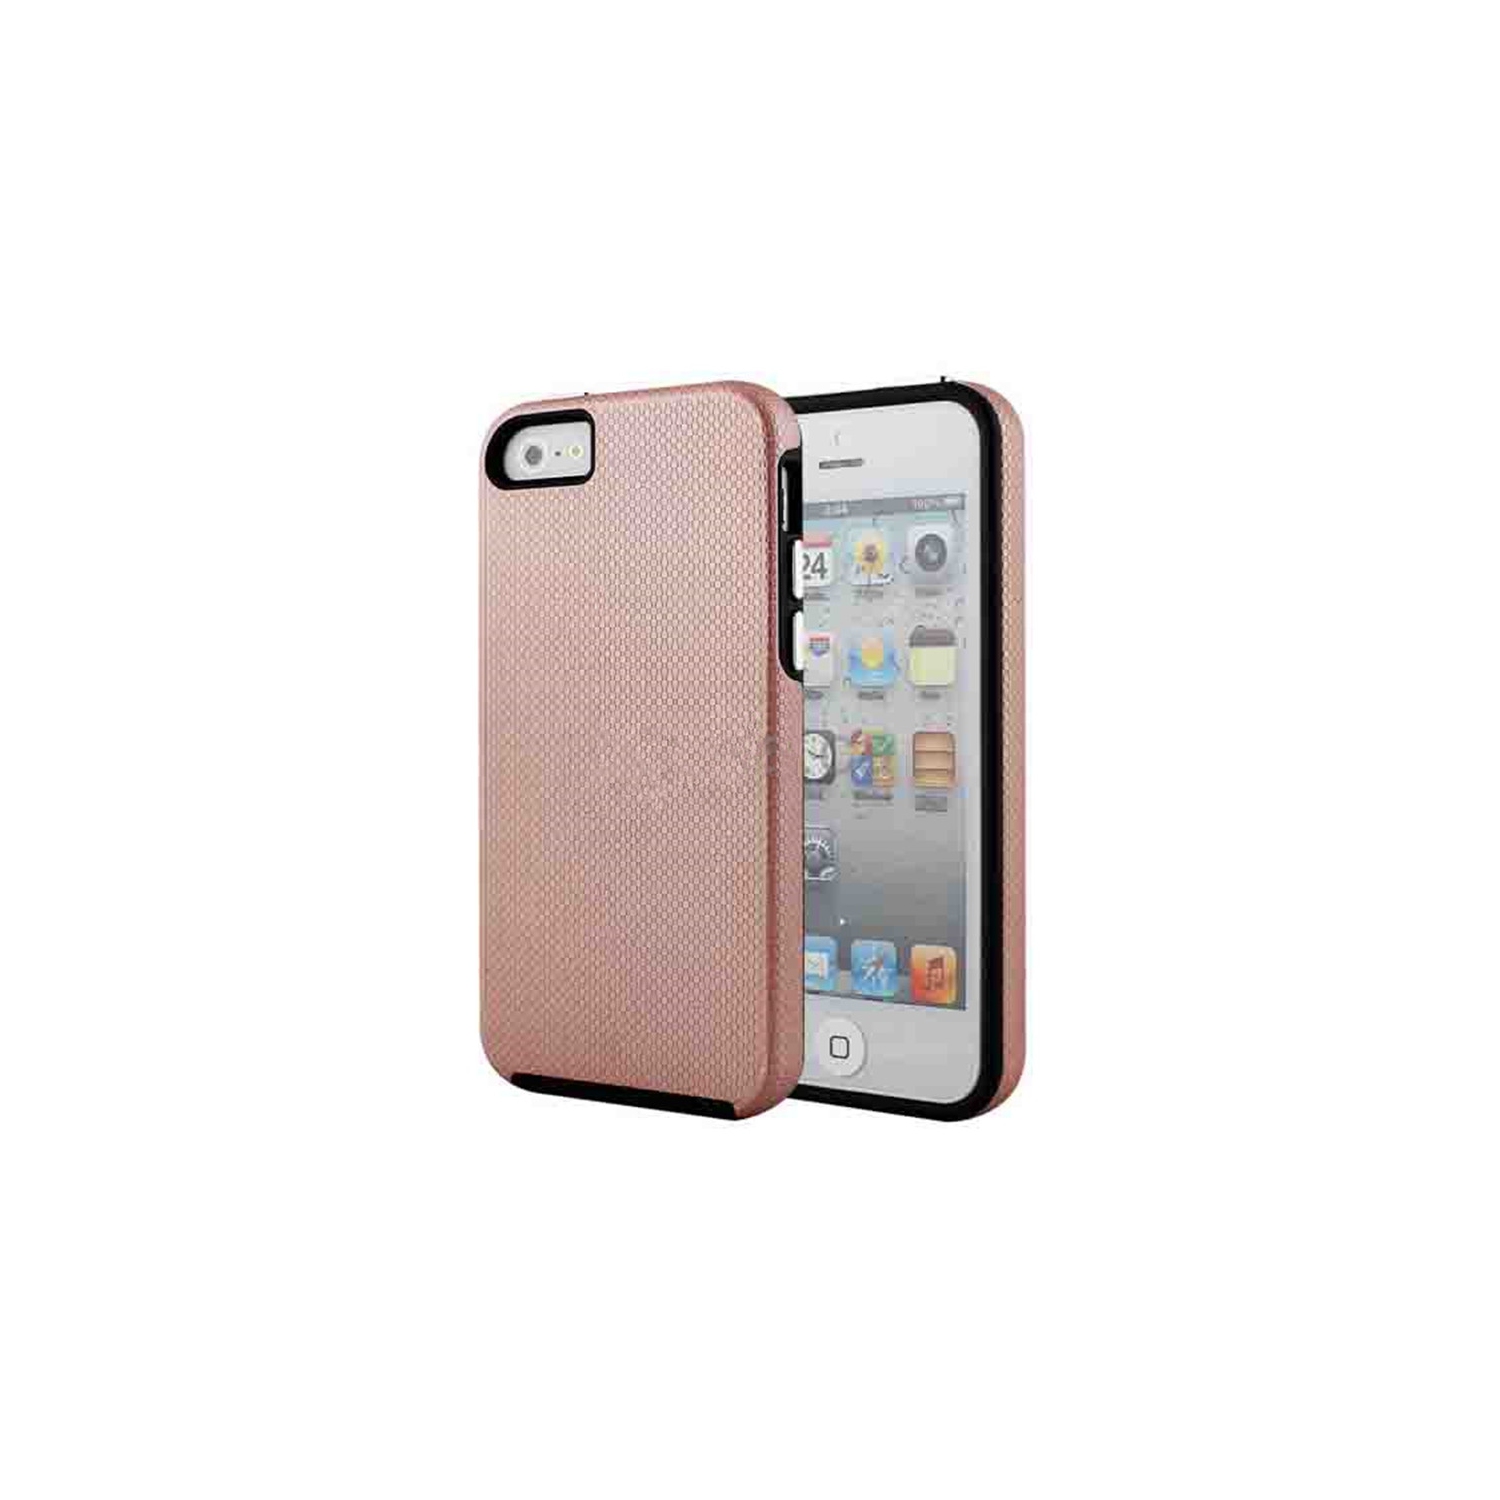 【CSmart】 Slim Fitted Hybrid Hard PC Shell Shockproof Scratch Resistant Case Cover for iPhone 5 / 5S / SE, Rose Gold